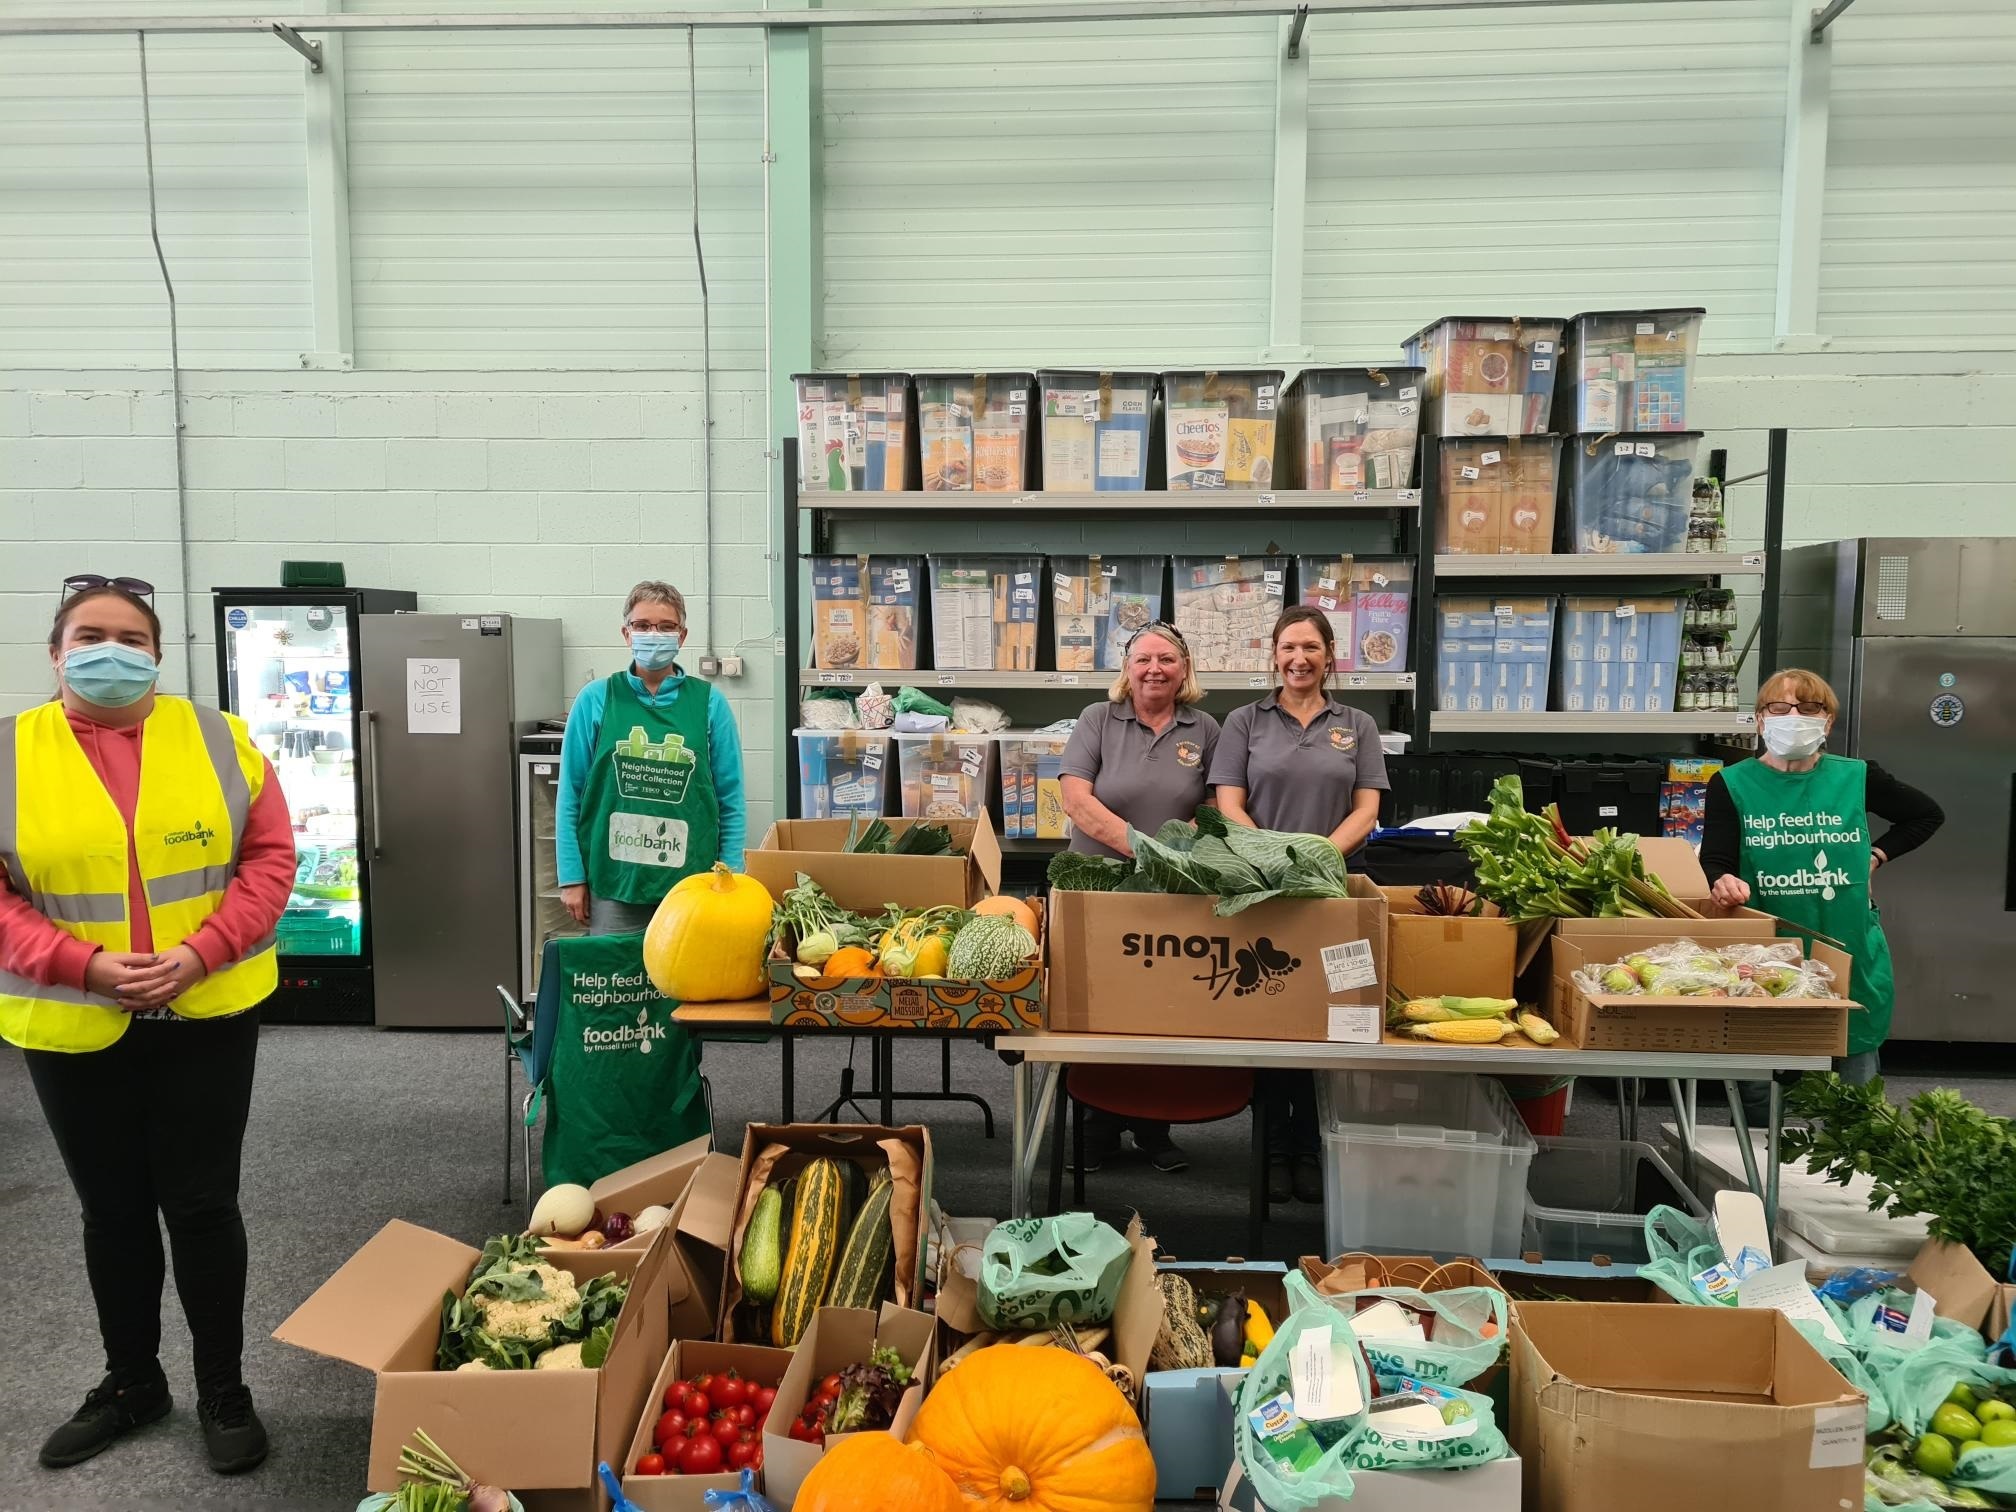 Volunteers and an allotment society that donated their vegetables to the food bank last year